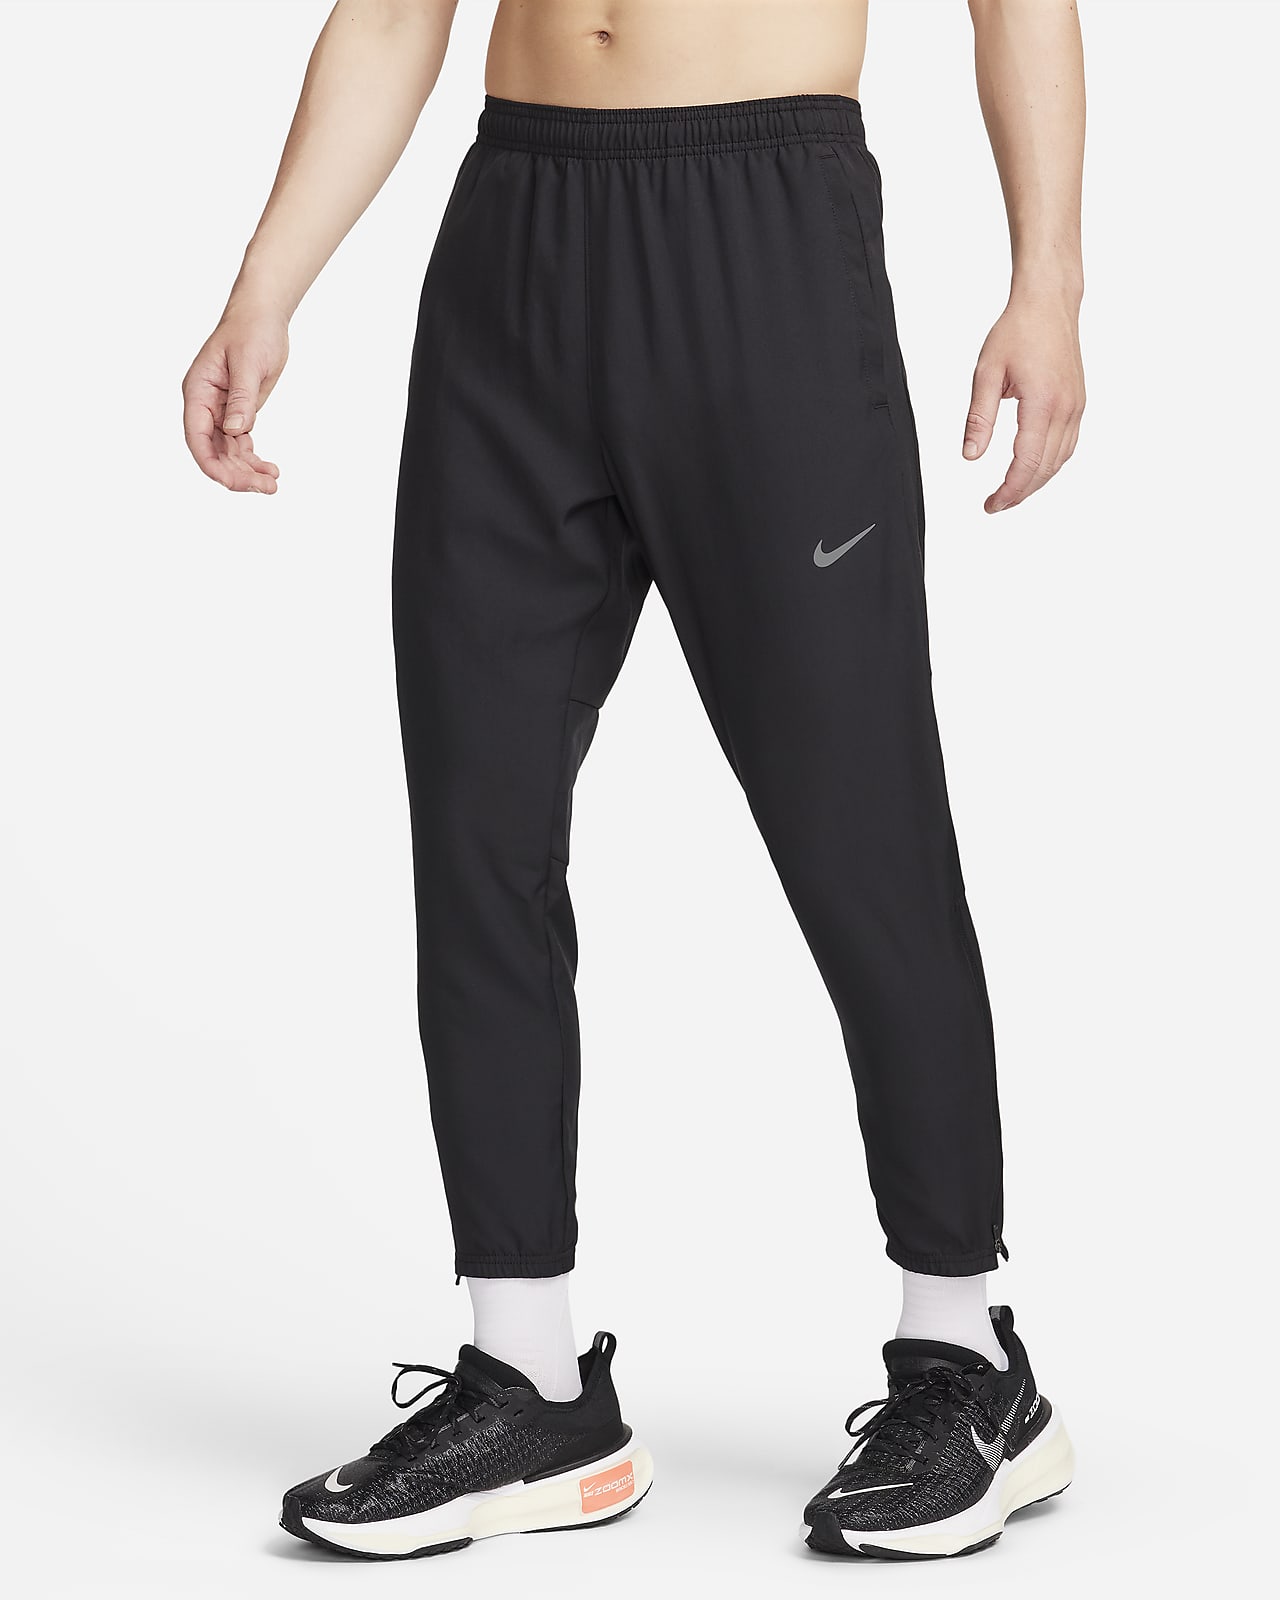 https://static.nike.com/a/images/t_PDP_1280_v1/f_auto,q_auto:eco/007de5d1-7162-4d49-b03f-2a033d7ba8d0/challenger-mens-dri-fit-woven-running-pants-Wx8Vsx.png